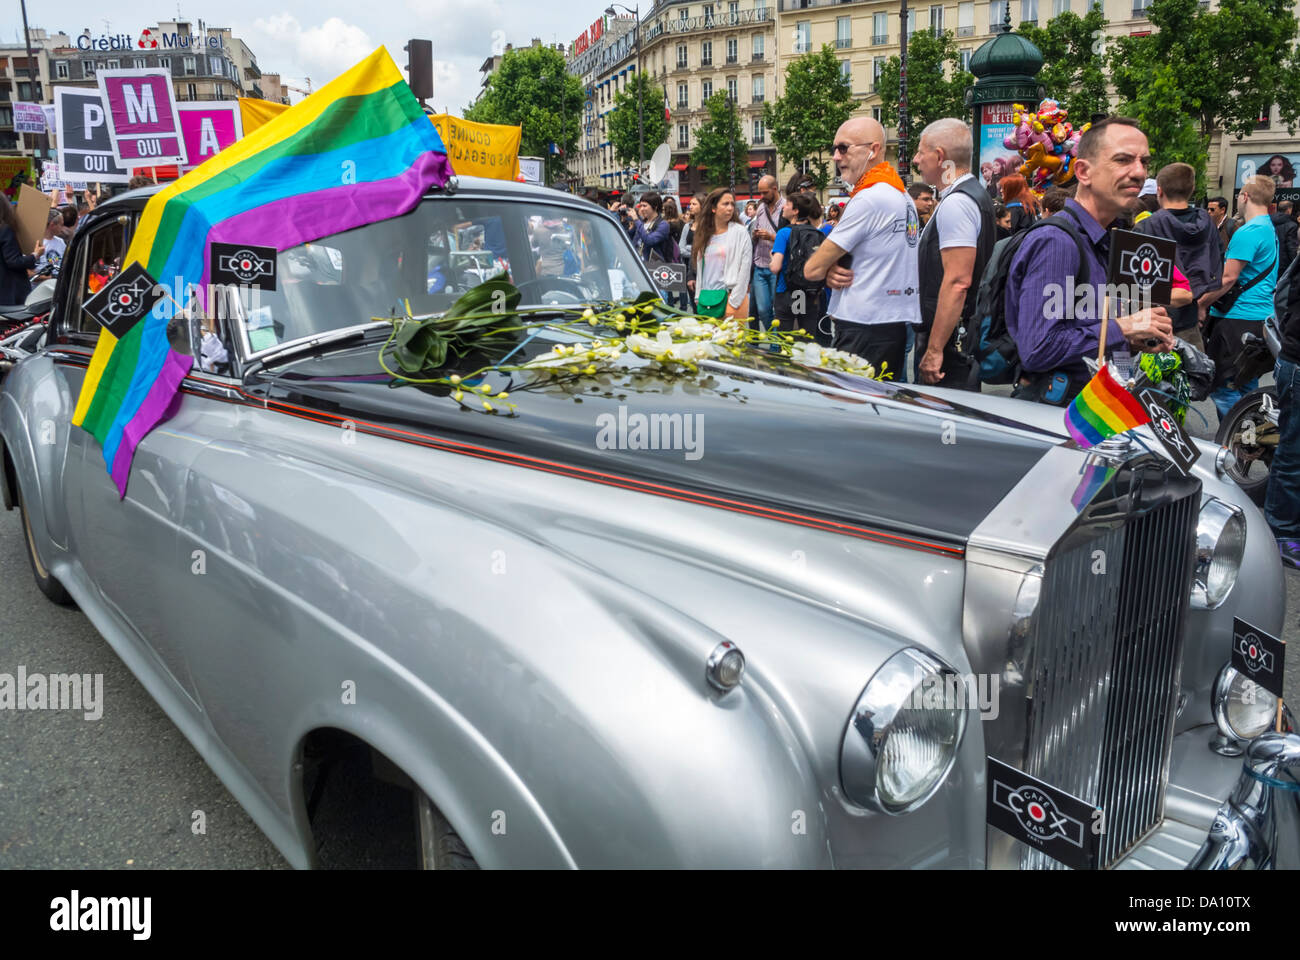 Paris, France, Rolls Royce Car, Gay Marriage, LGBT Groups in Annual Gay Pride Parade, Rainbow Flag, Side View on Street Stock Photo